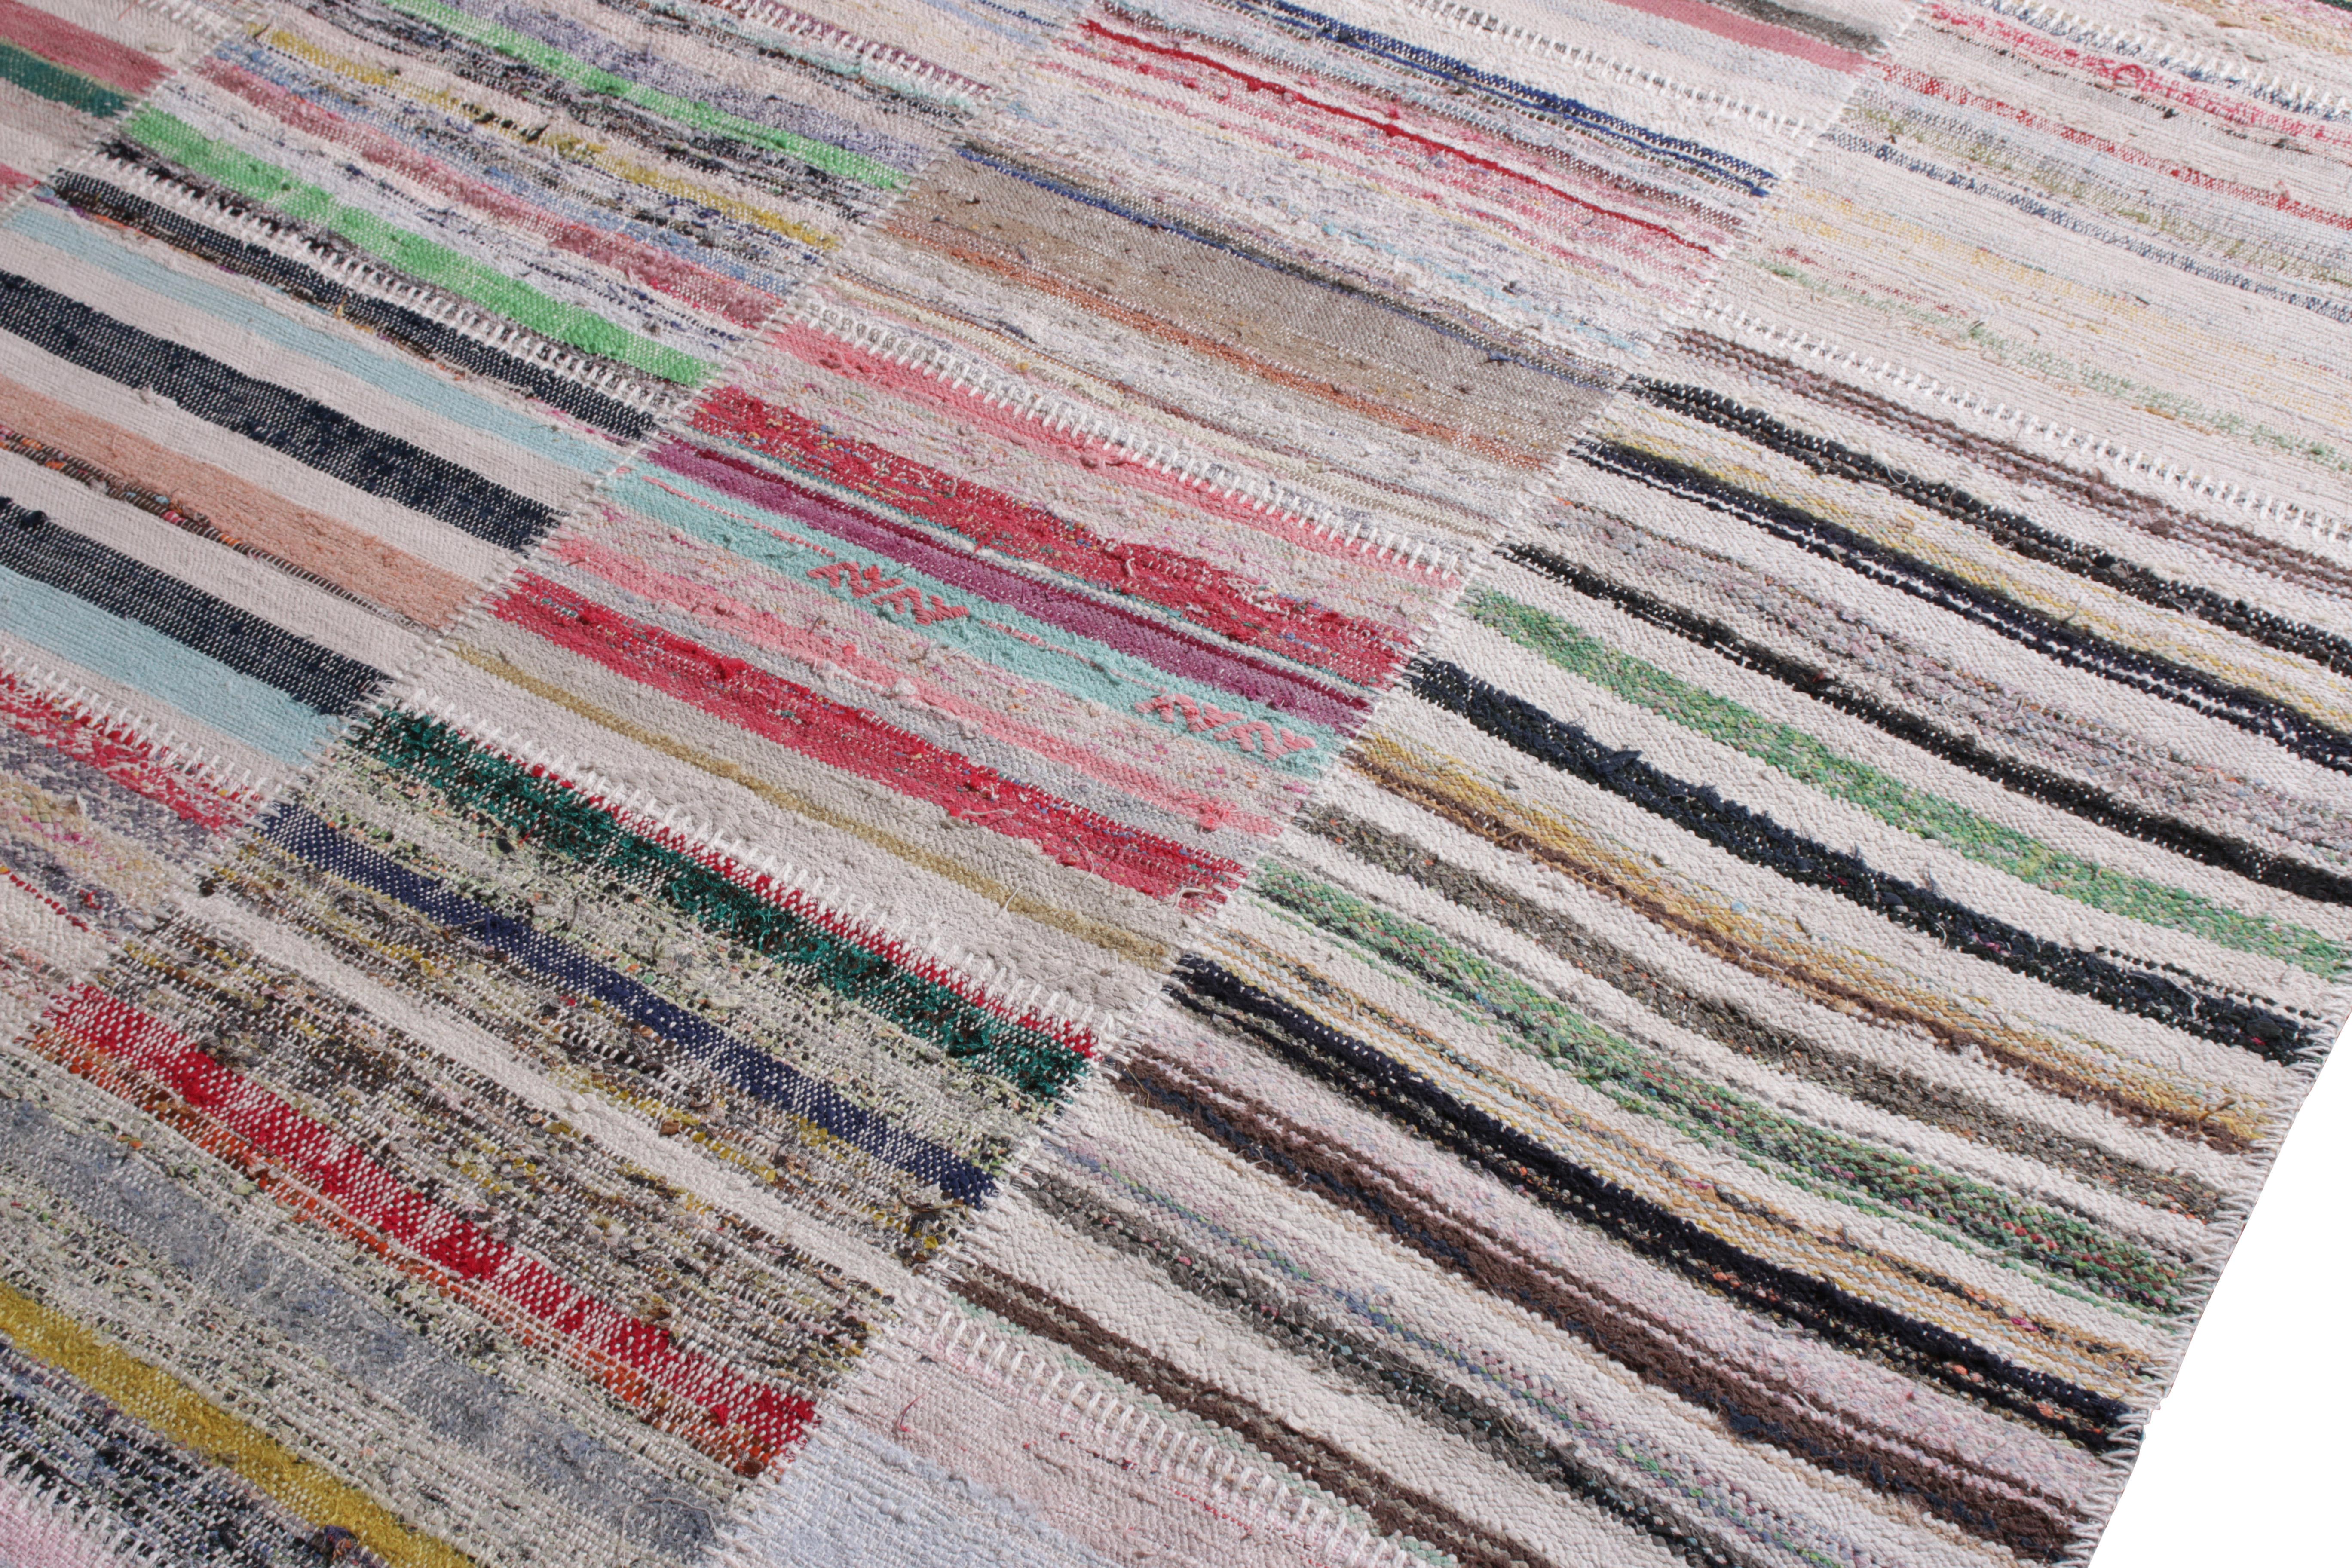 Rug & Kilim's Modern Patchwork Kilim Rug in Gray Multi-Color Stripe Pattern In New Condition For Sale In Long Island City, NY